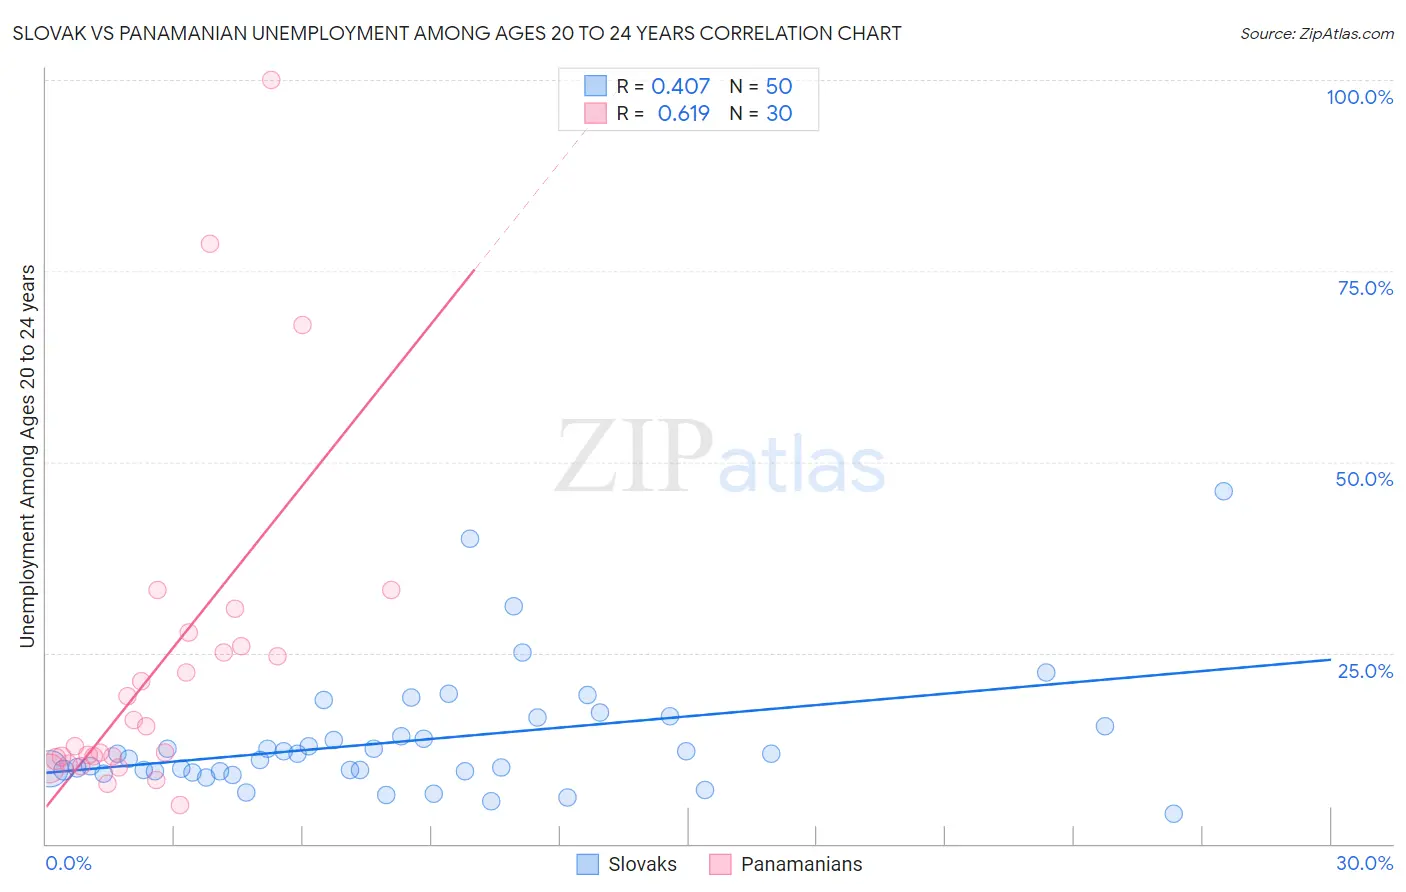 Slovak vs Panamanian Unemployment Among Ages 20 to 24 years